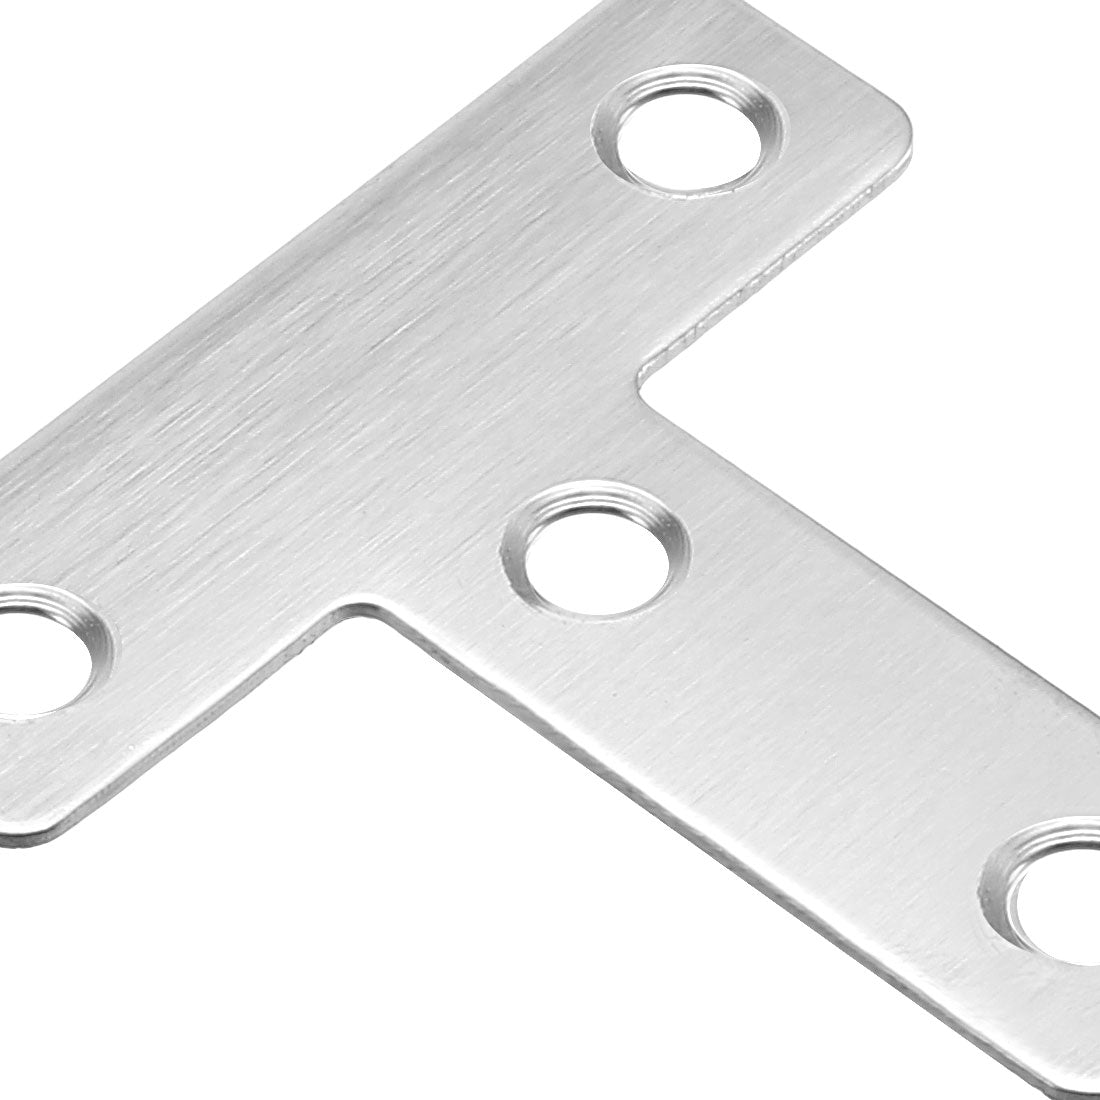 uxcell Uxcell Flat T Shape Repair Mending Plate, 50mmx50mm, Stainless steel Joining Bracket Support Brace, 5 pcs